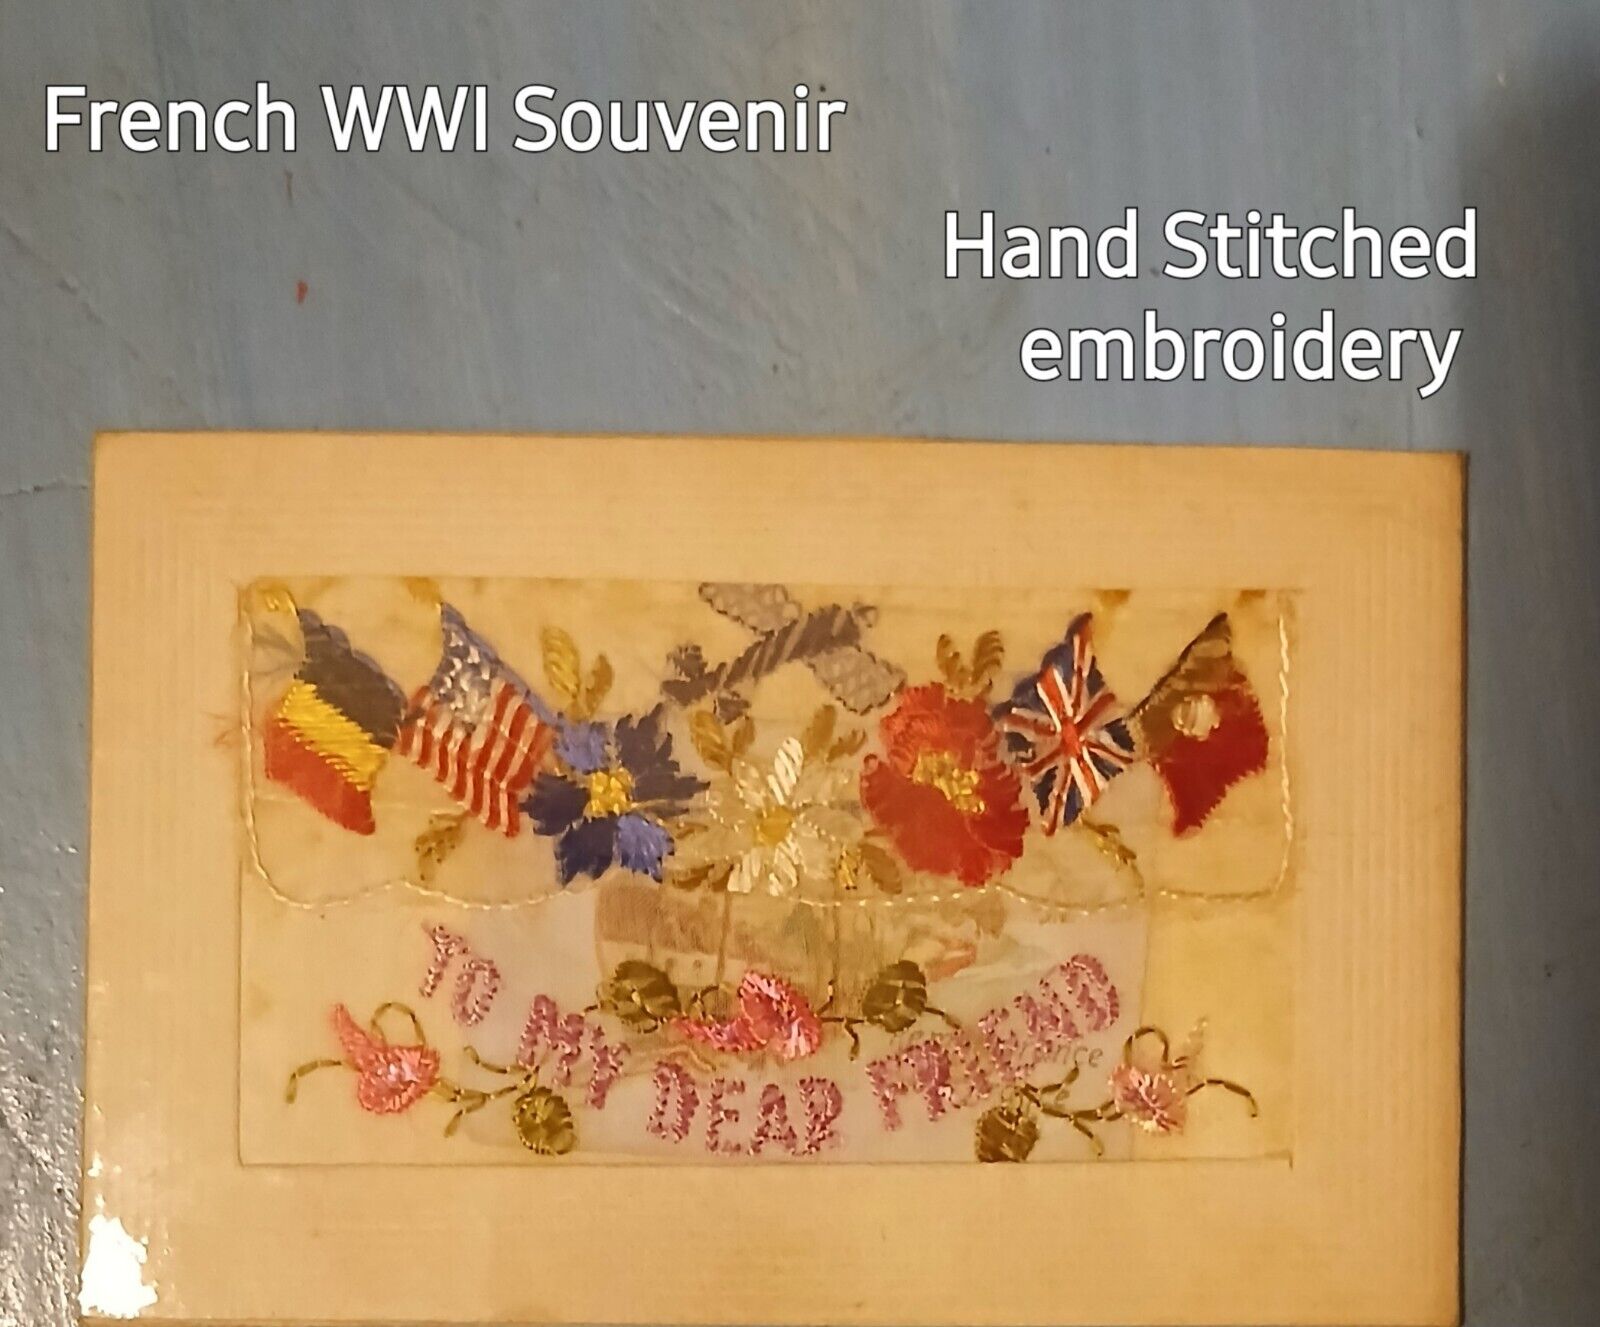 Original Handmade WWI French Embroidery Souvenir. Well Kept Still Sealed In Wrap